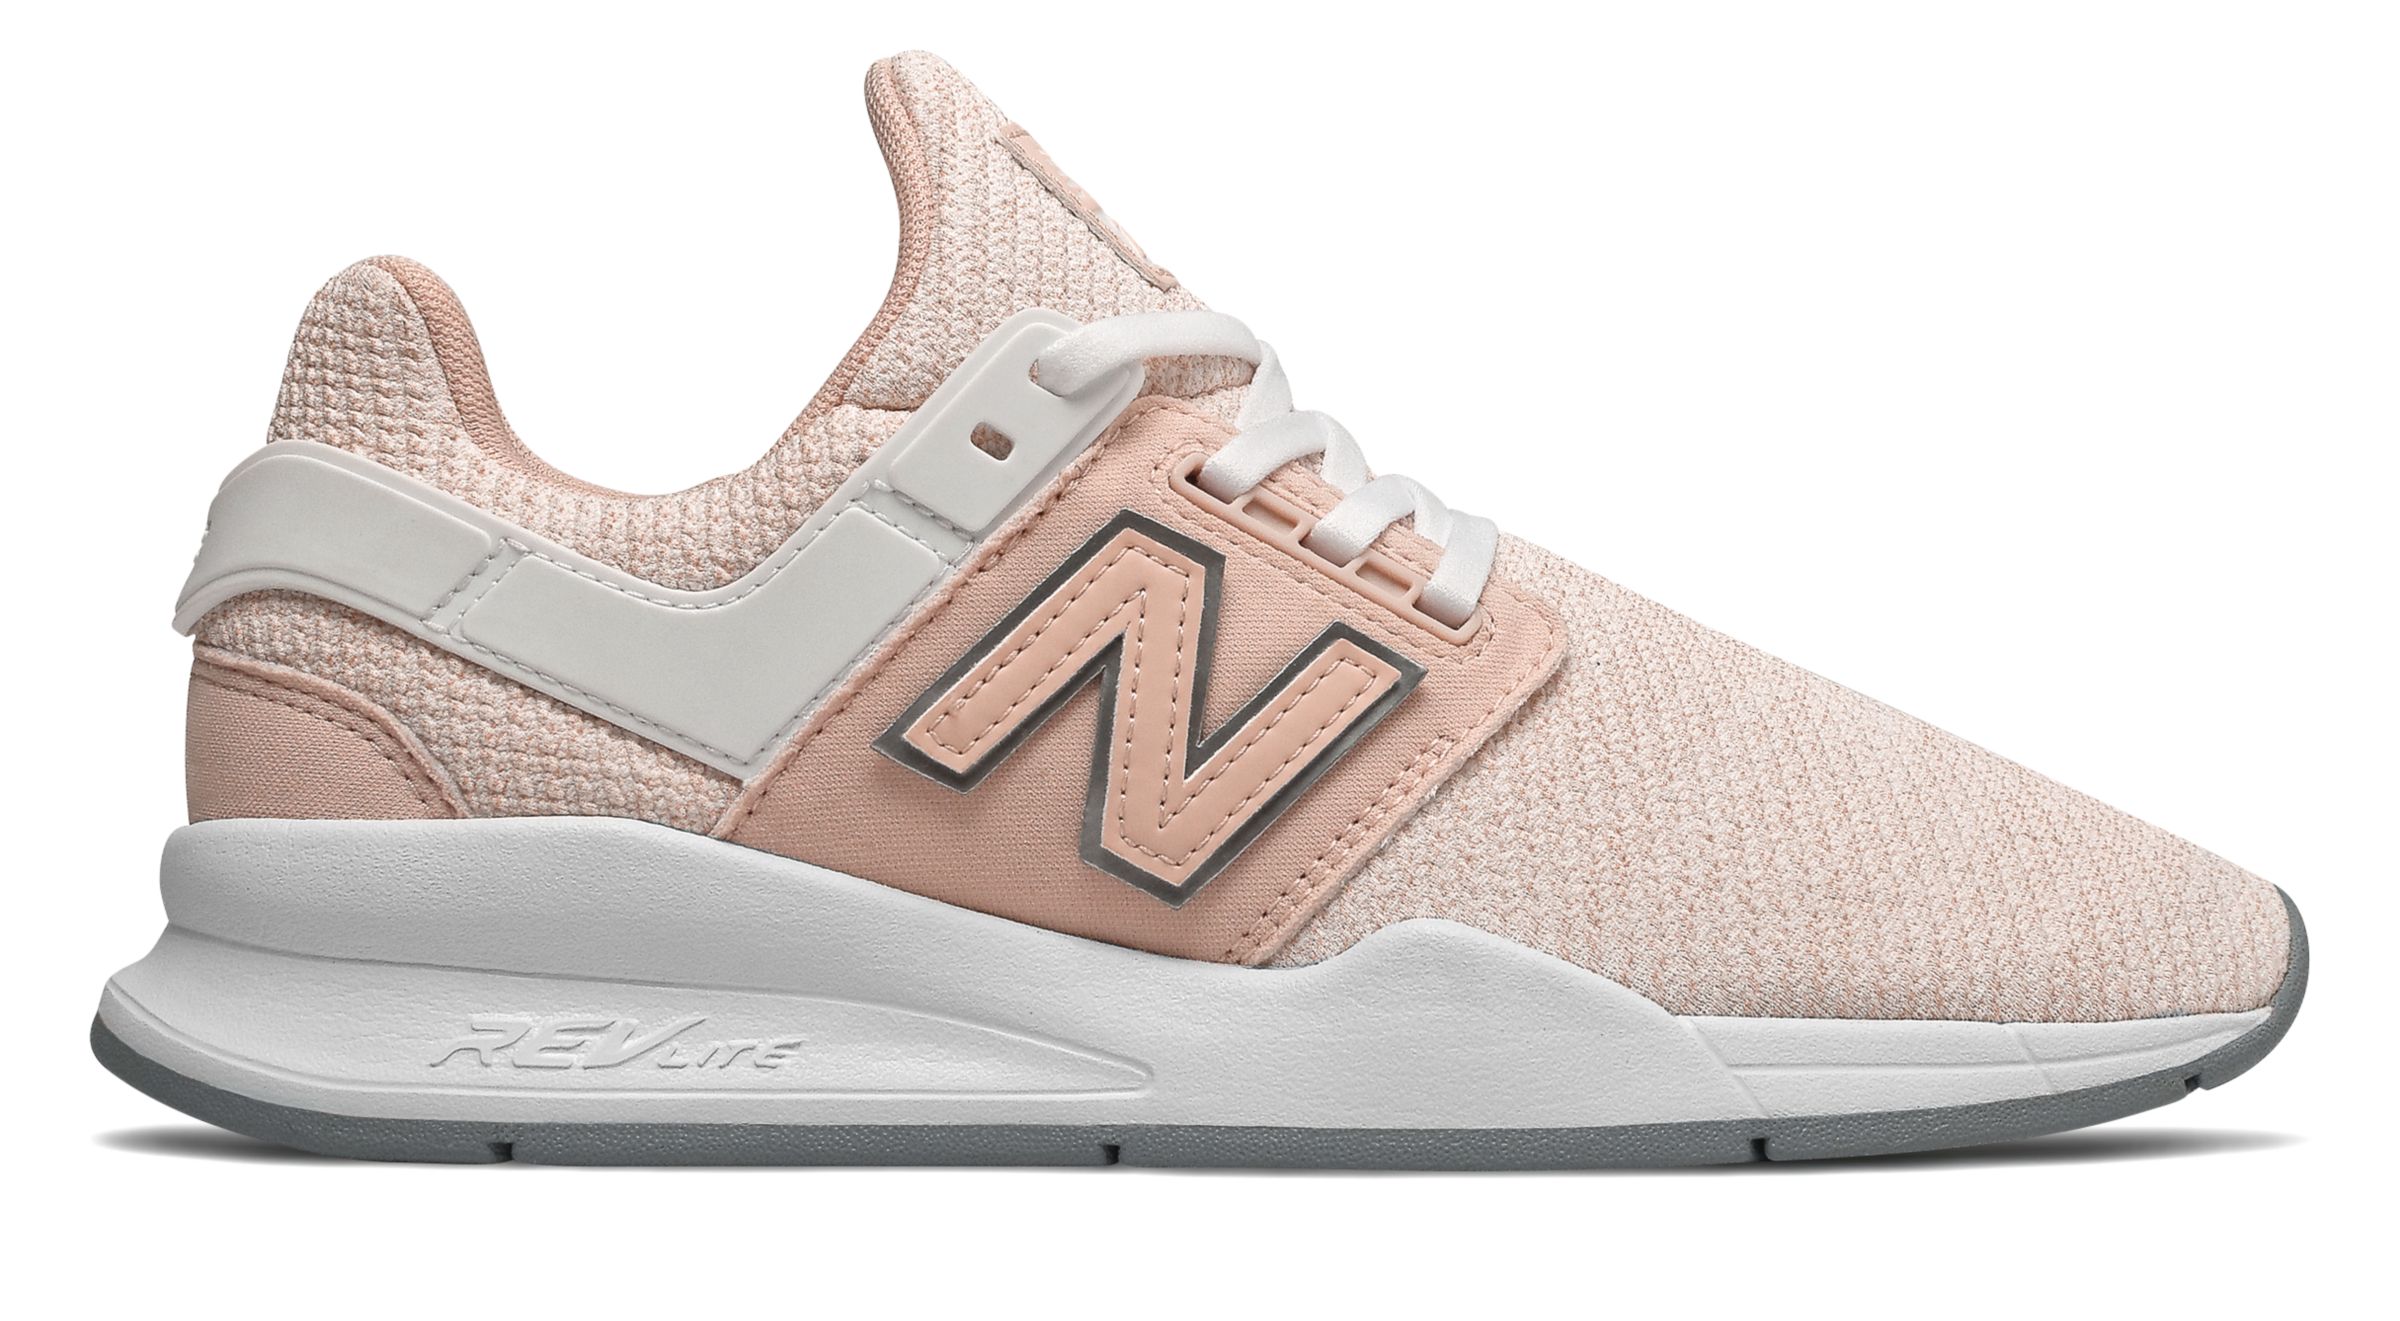 New Balance WS247-V2C on Sale - Discounts Up to 65% Off on WS247TI at Joe's  New Balance Outlet